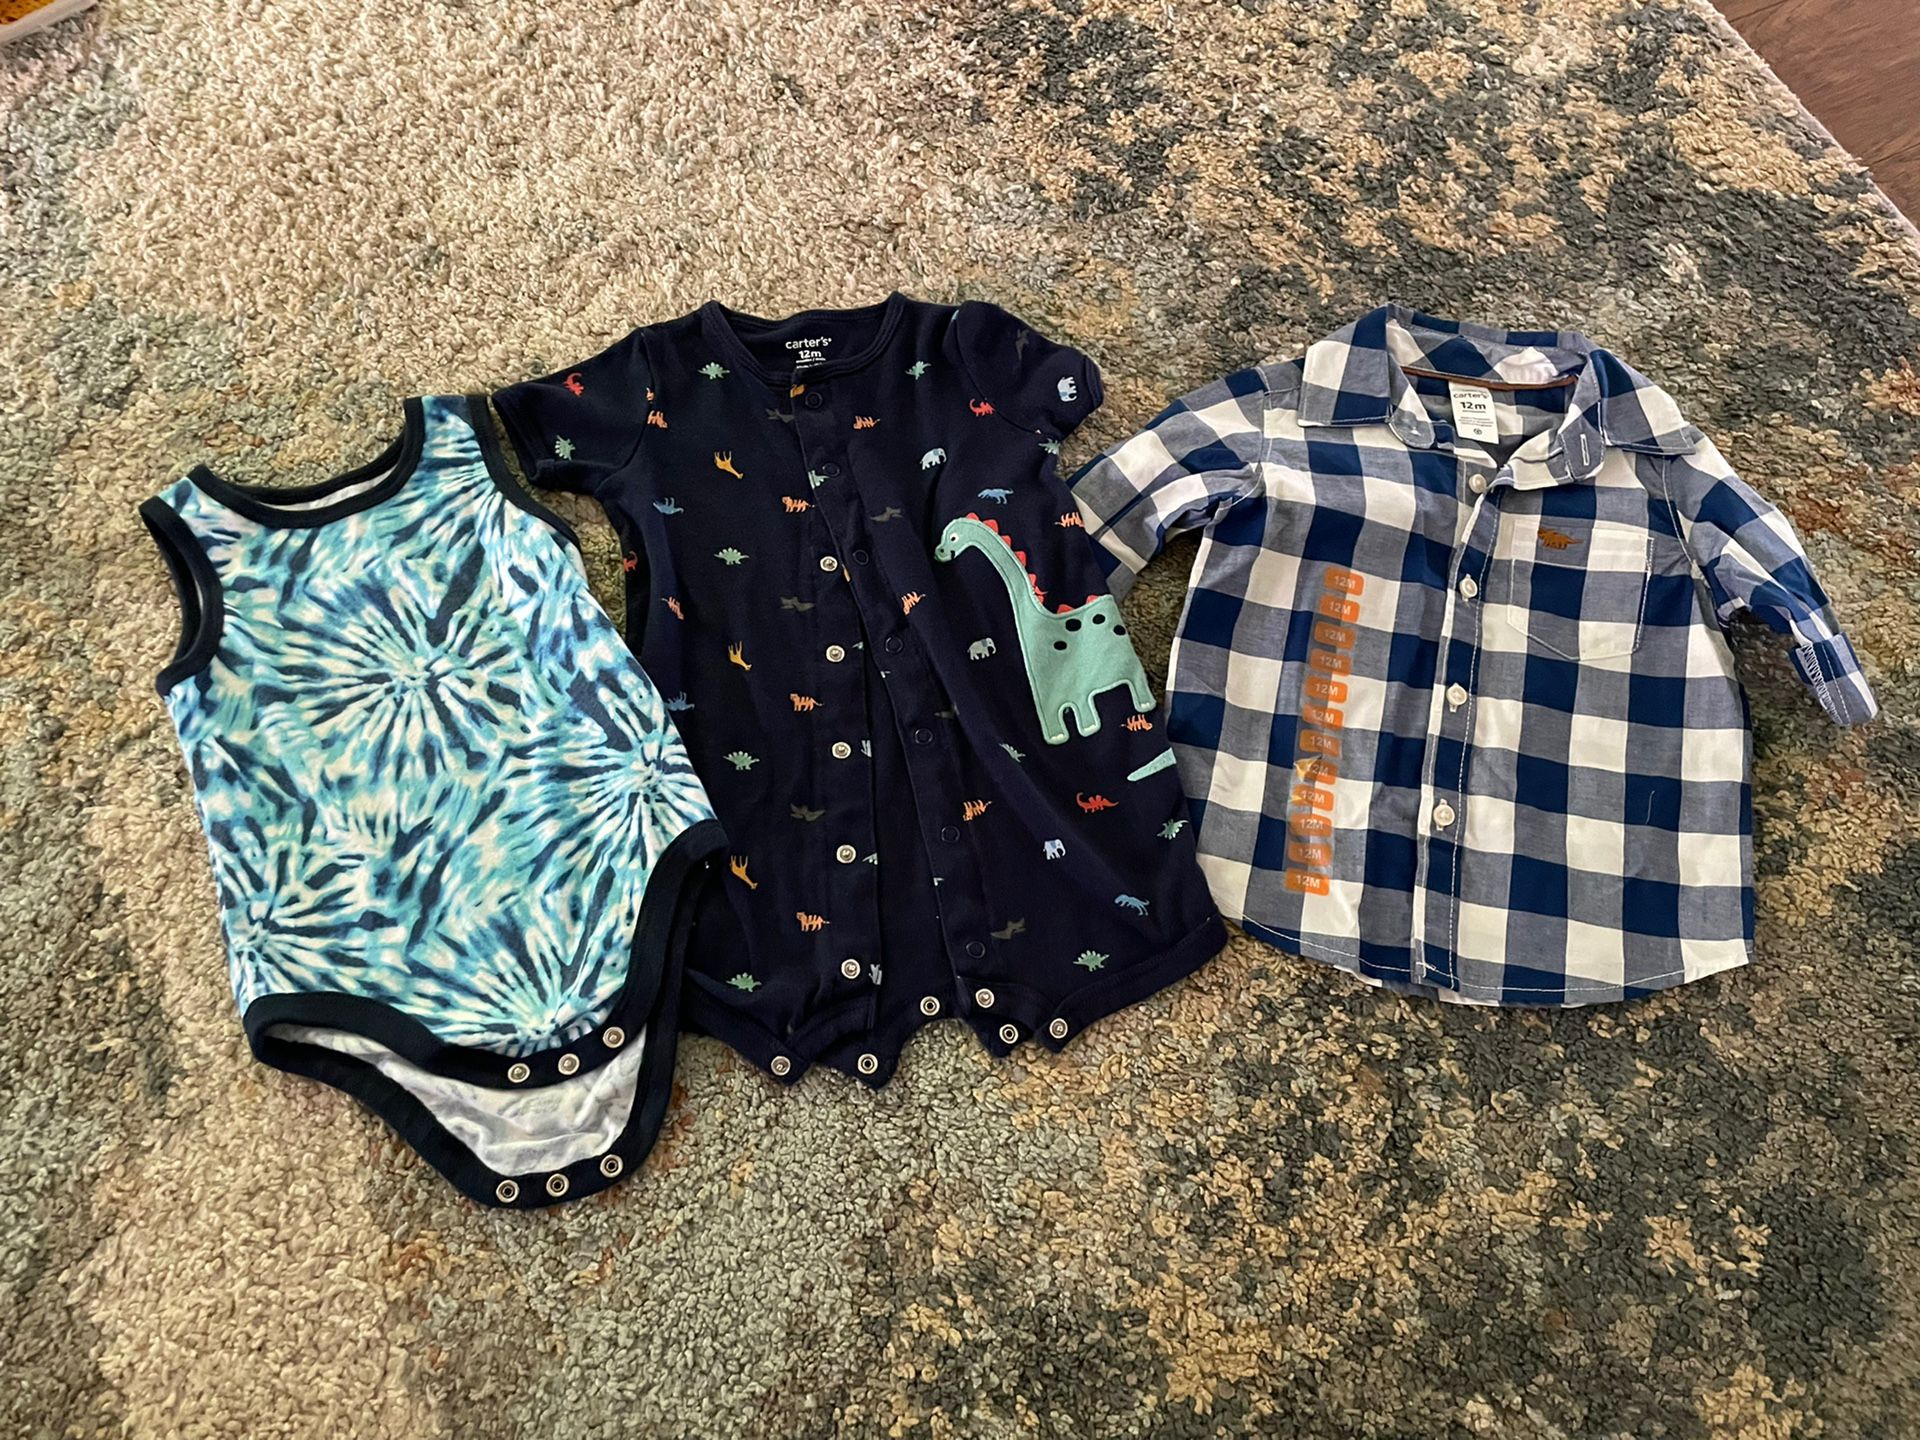 19 Items Of Clothing 12-18 Months 